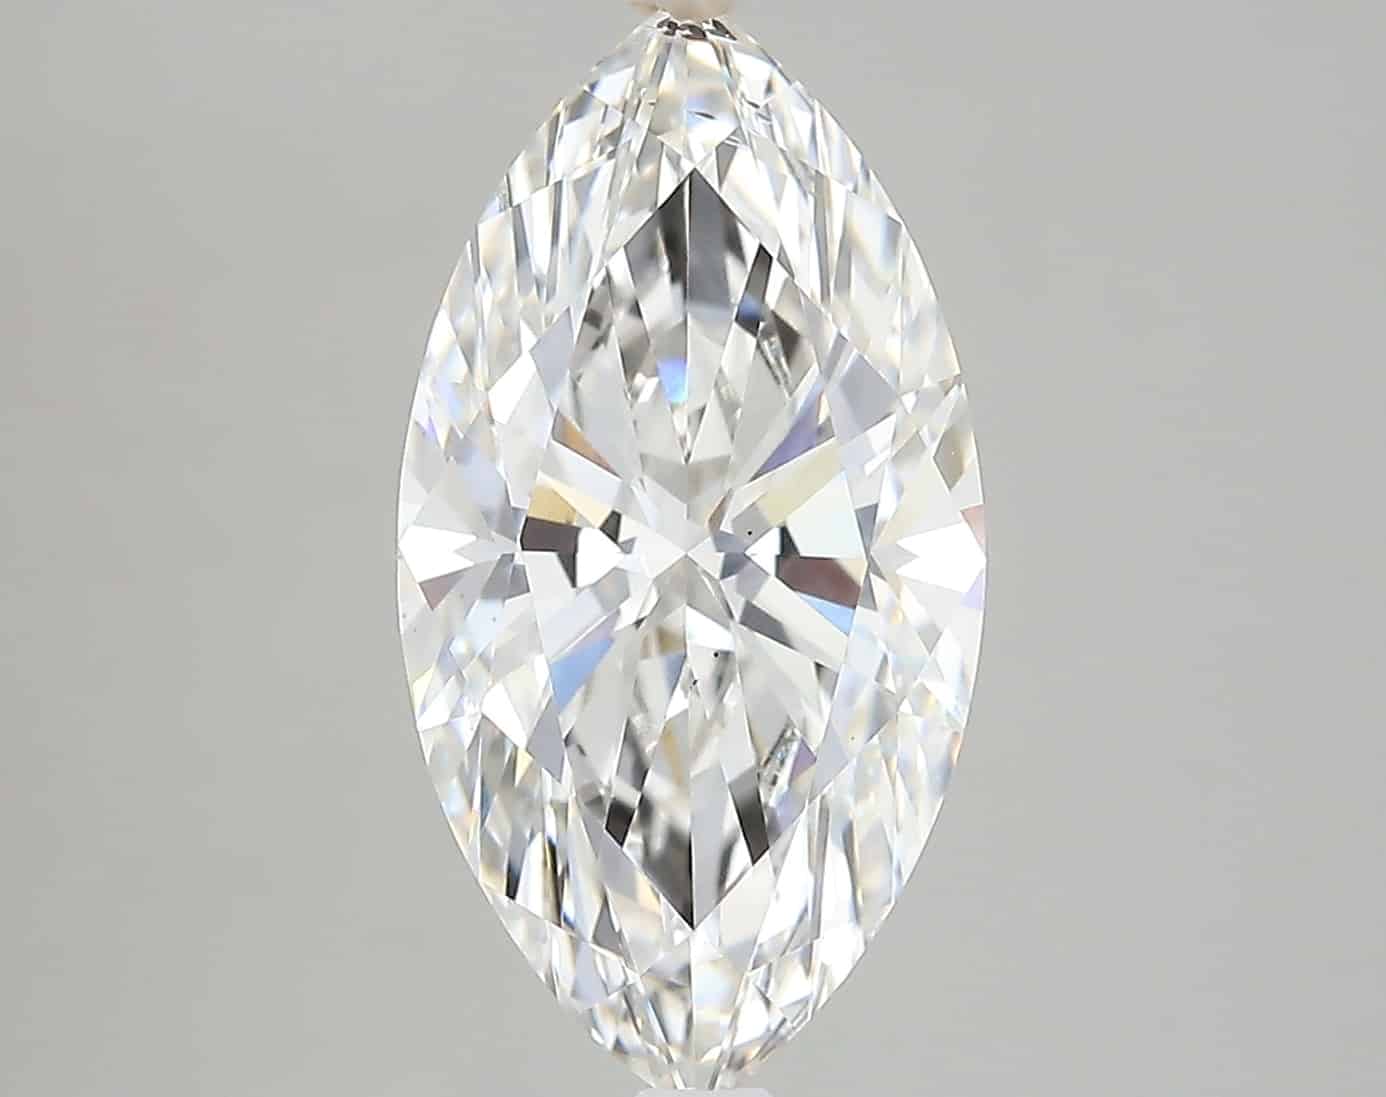 Lab Grown 3.33 Carat Diamond IGI Certified si1 clarity and G color